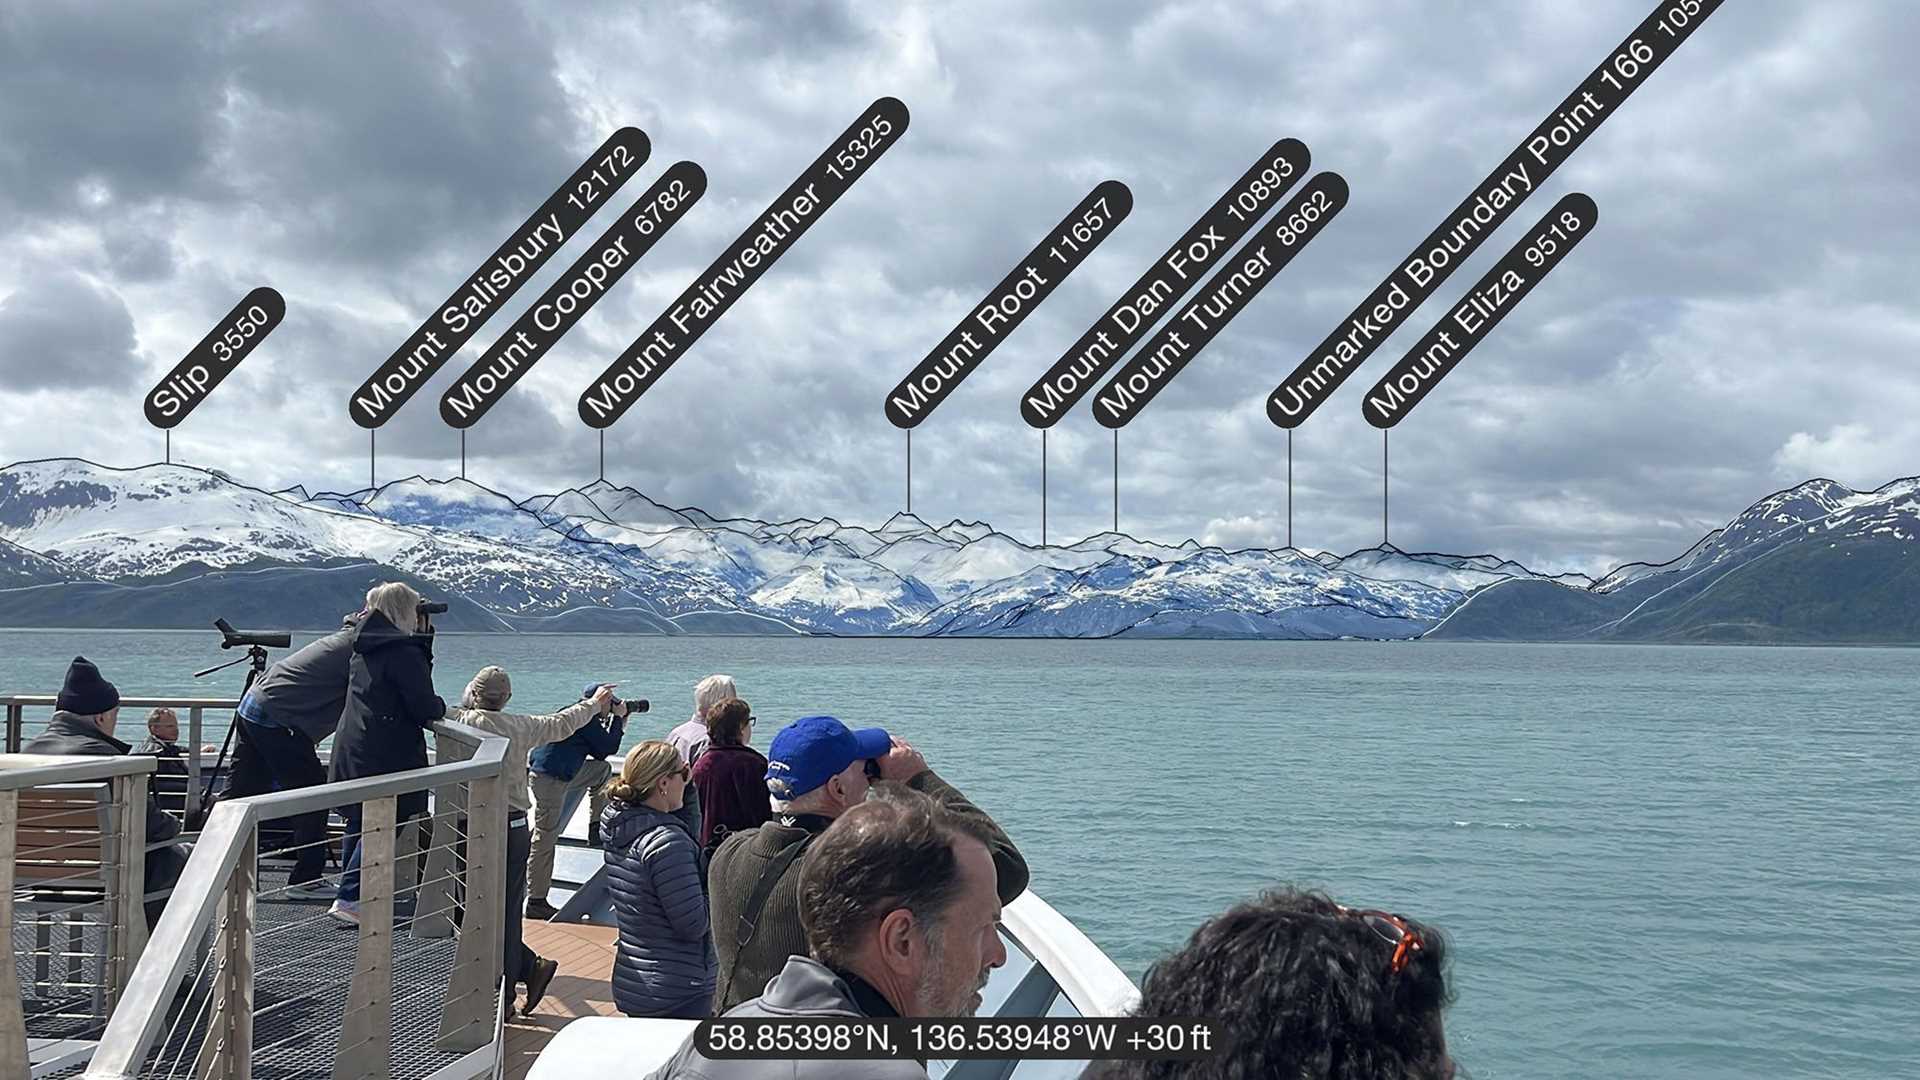 guests on the deck of a ship with labeled mountain peaks in the background